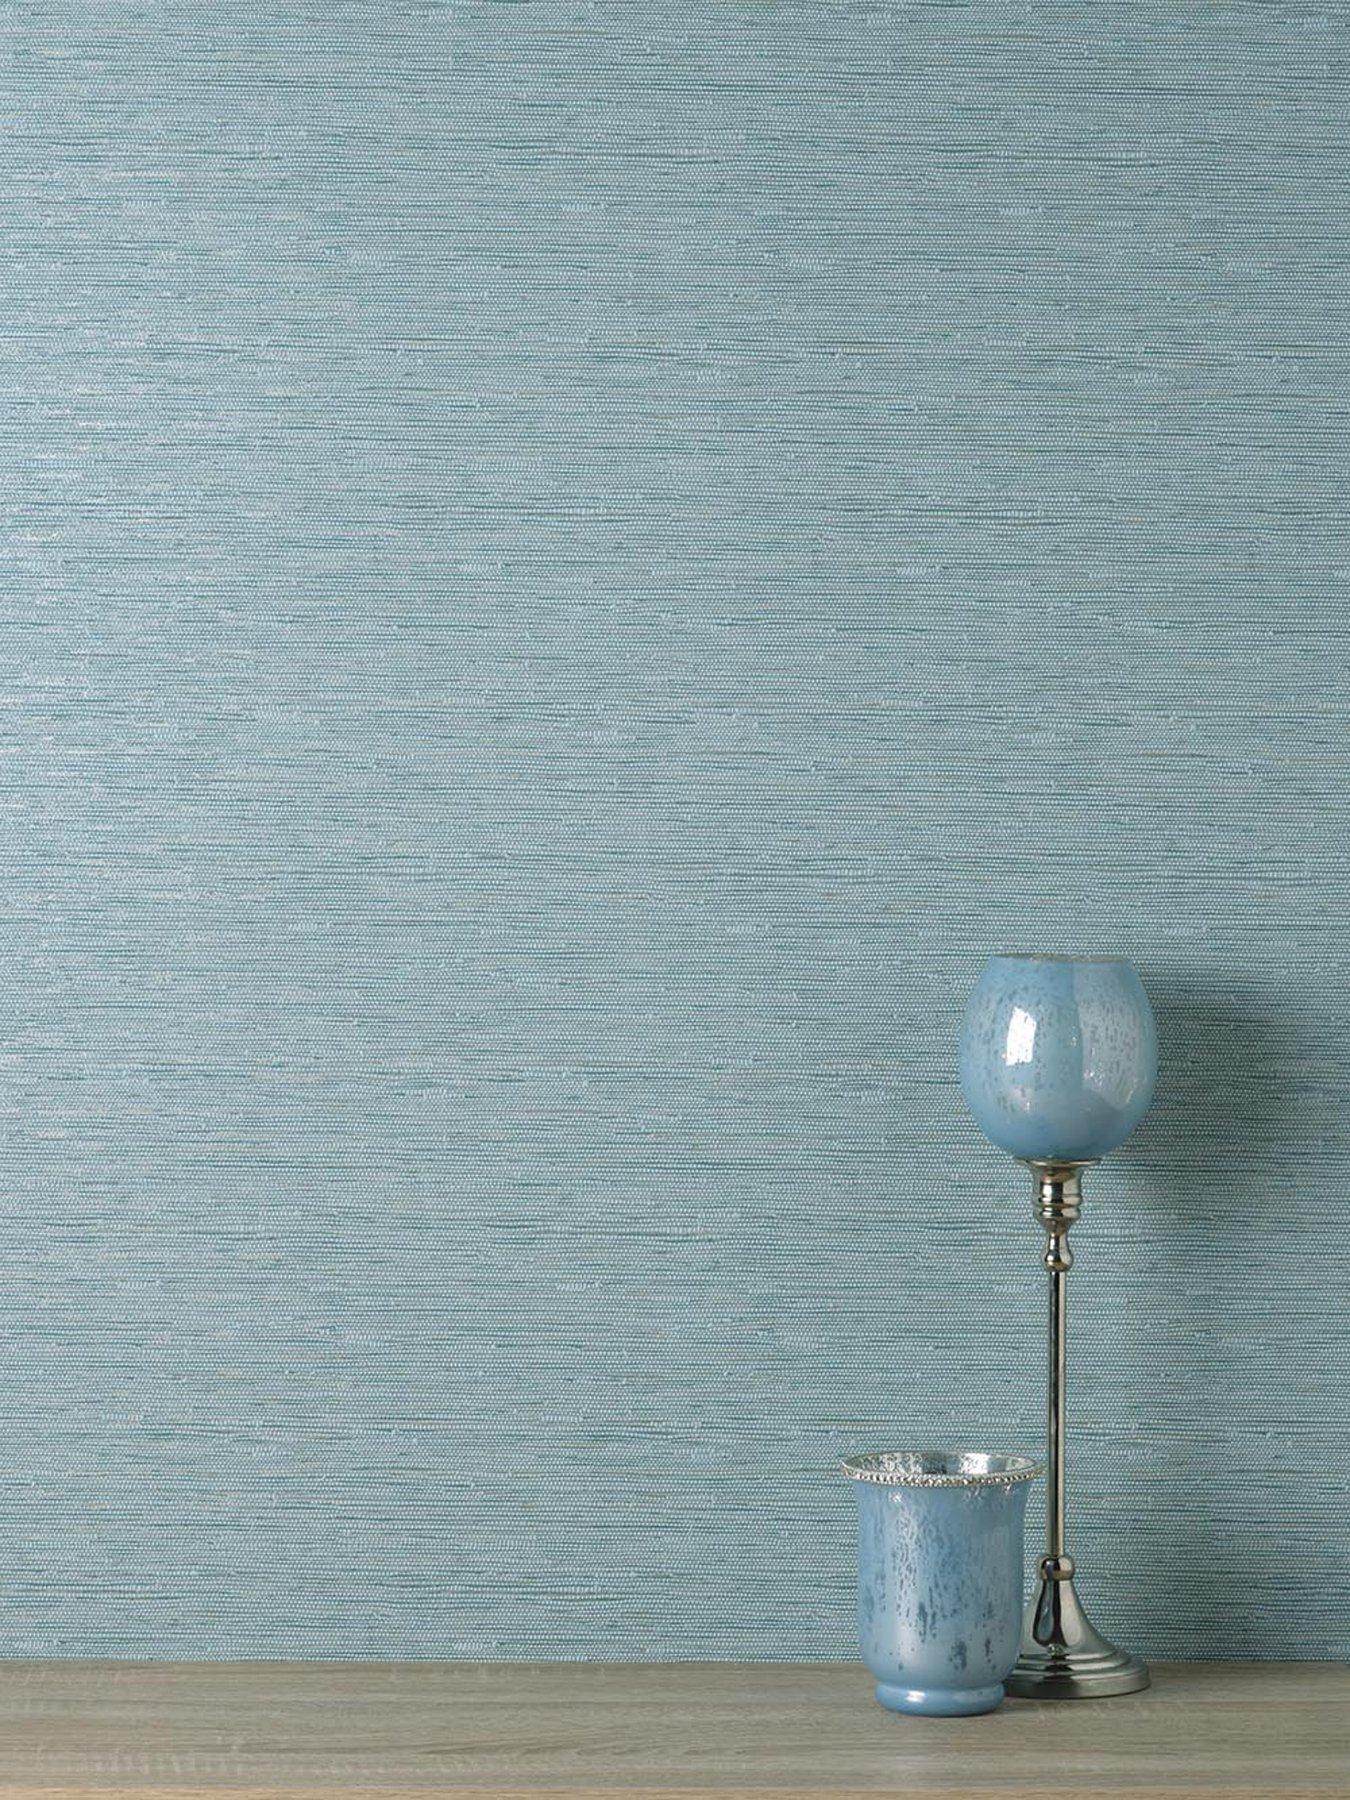 Light Teal Glitter Wallpaper Self Adhesive Teal Glitter Contact Paper  Decorative